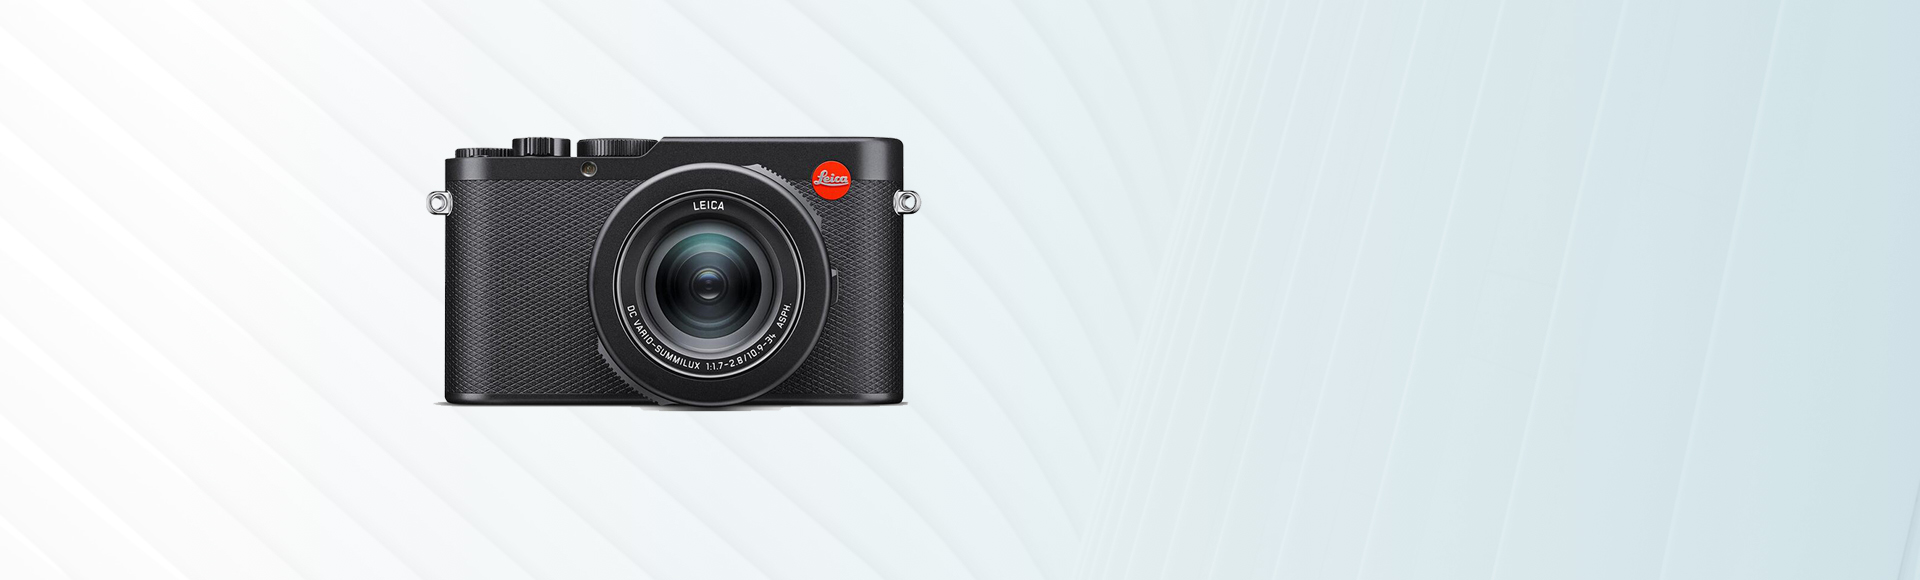 New Leica D-Lux 8